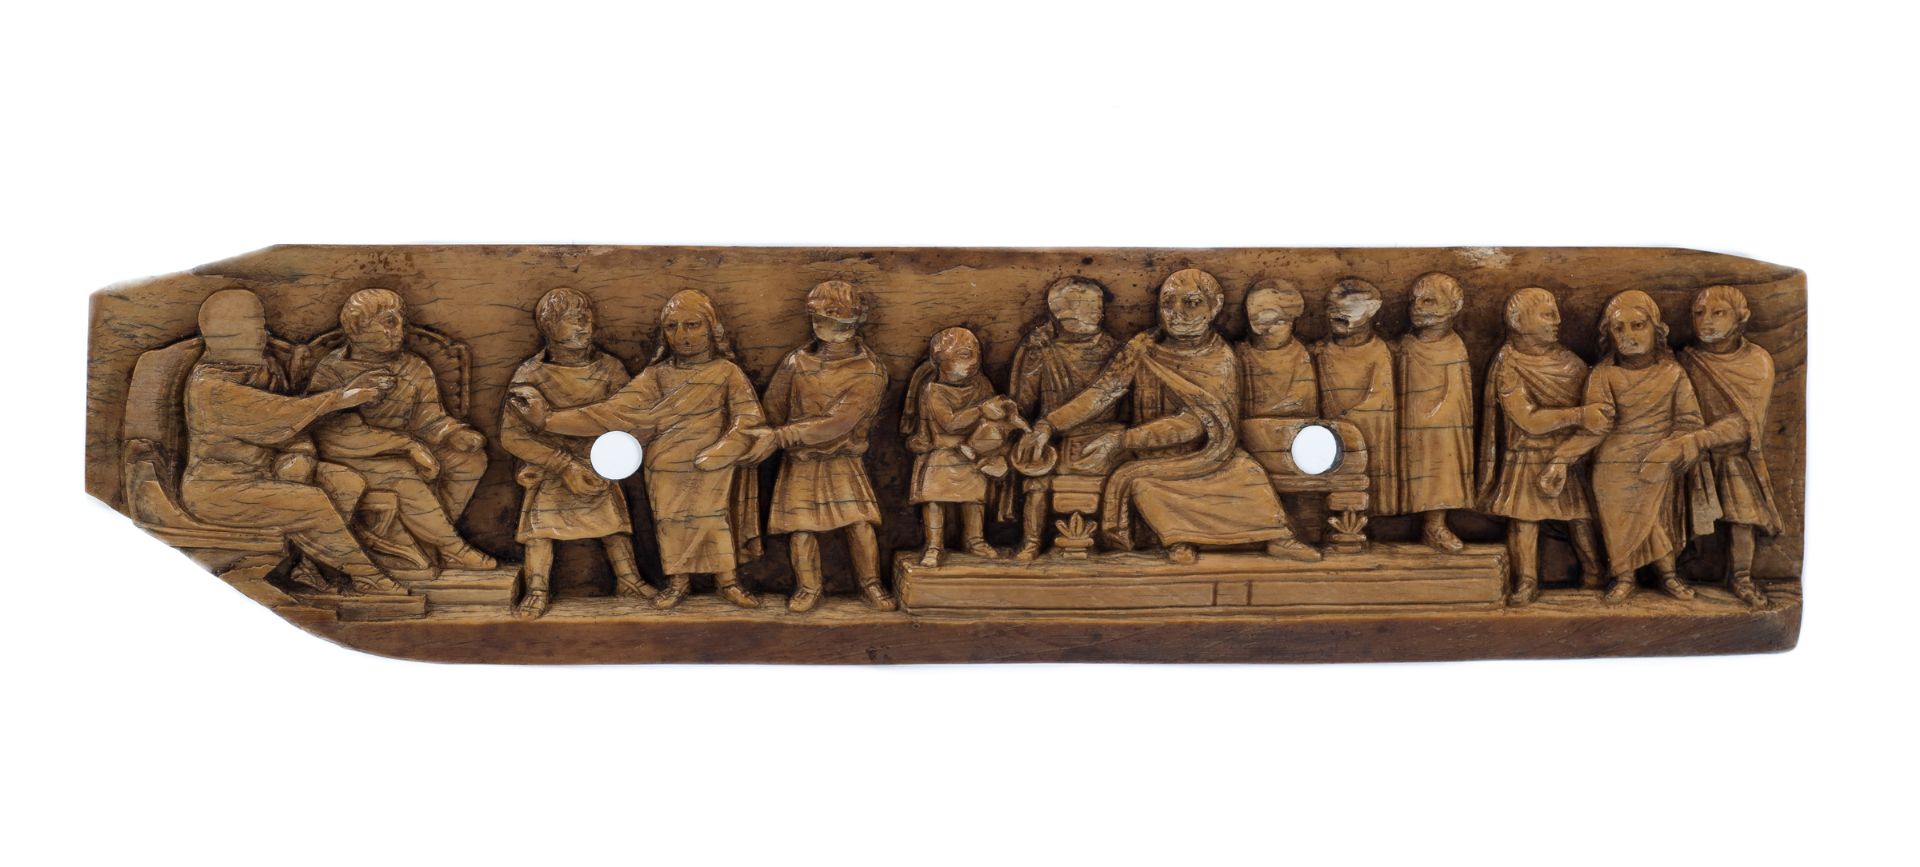 "The trial of Christ". Sculpted ivory relief. Carolingian Period. 6th - 9th century.